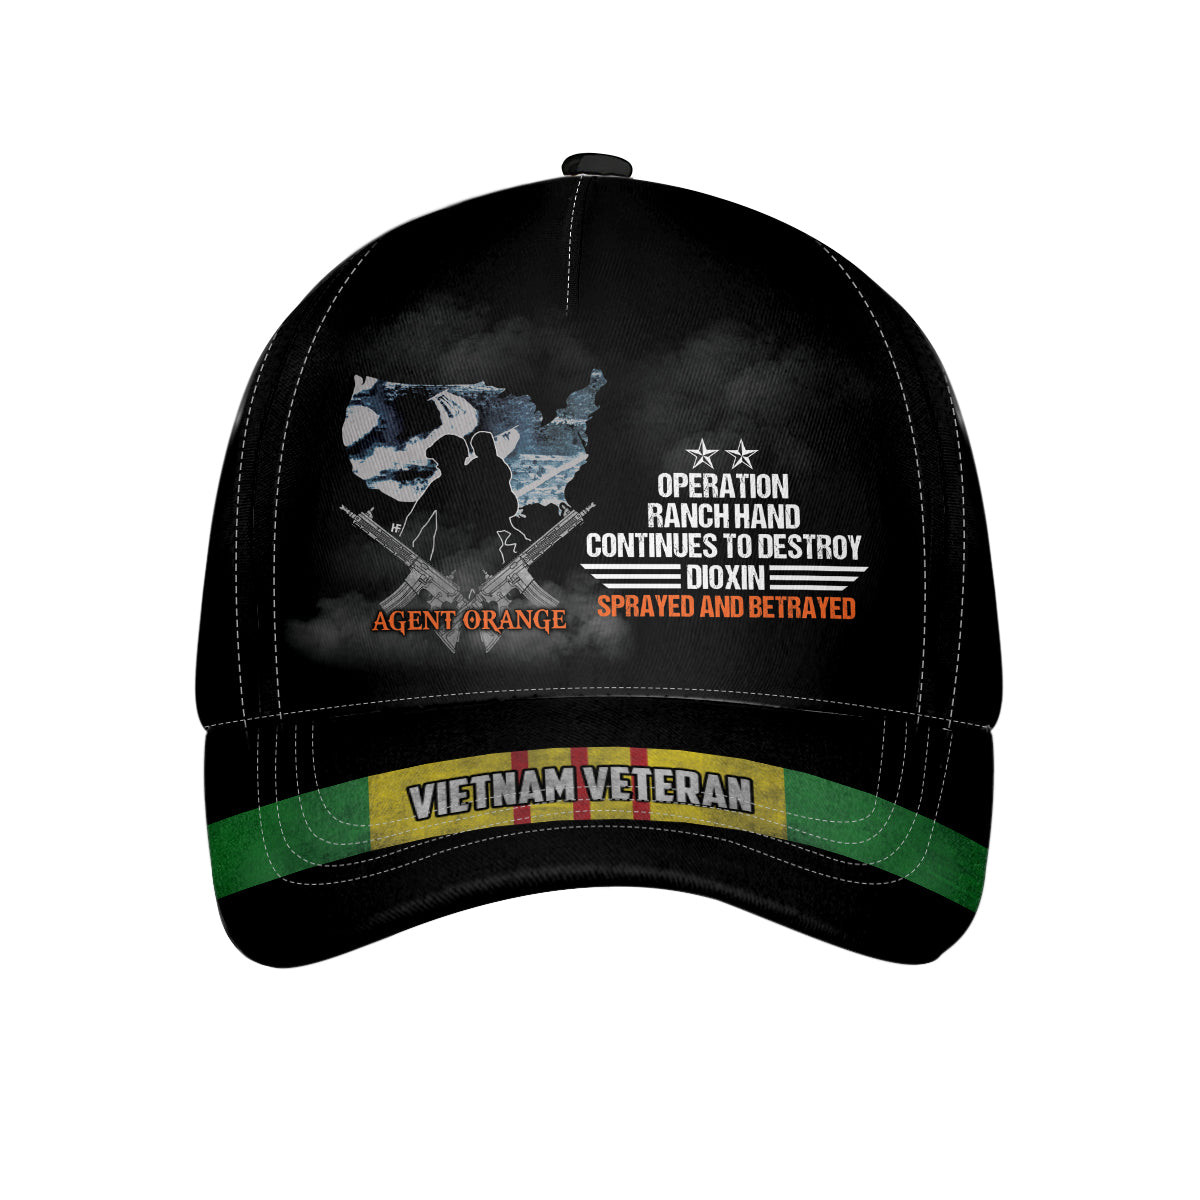 Agent Orange Operation Ranch Hand Continues To Destroy Classic Cap Gift For Veteran Day